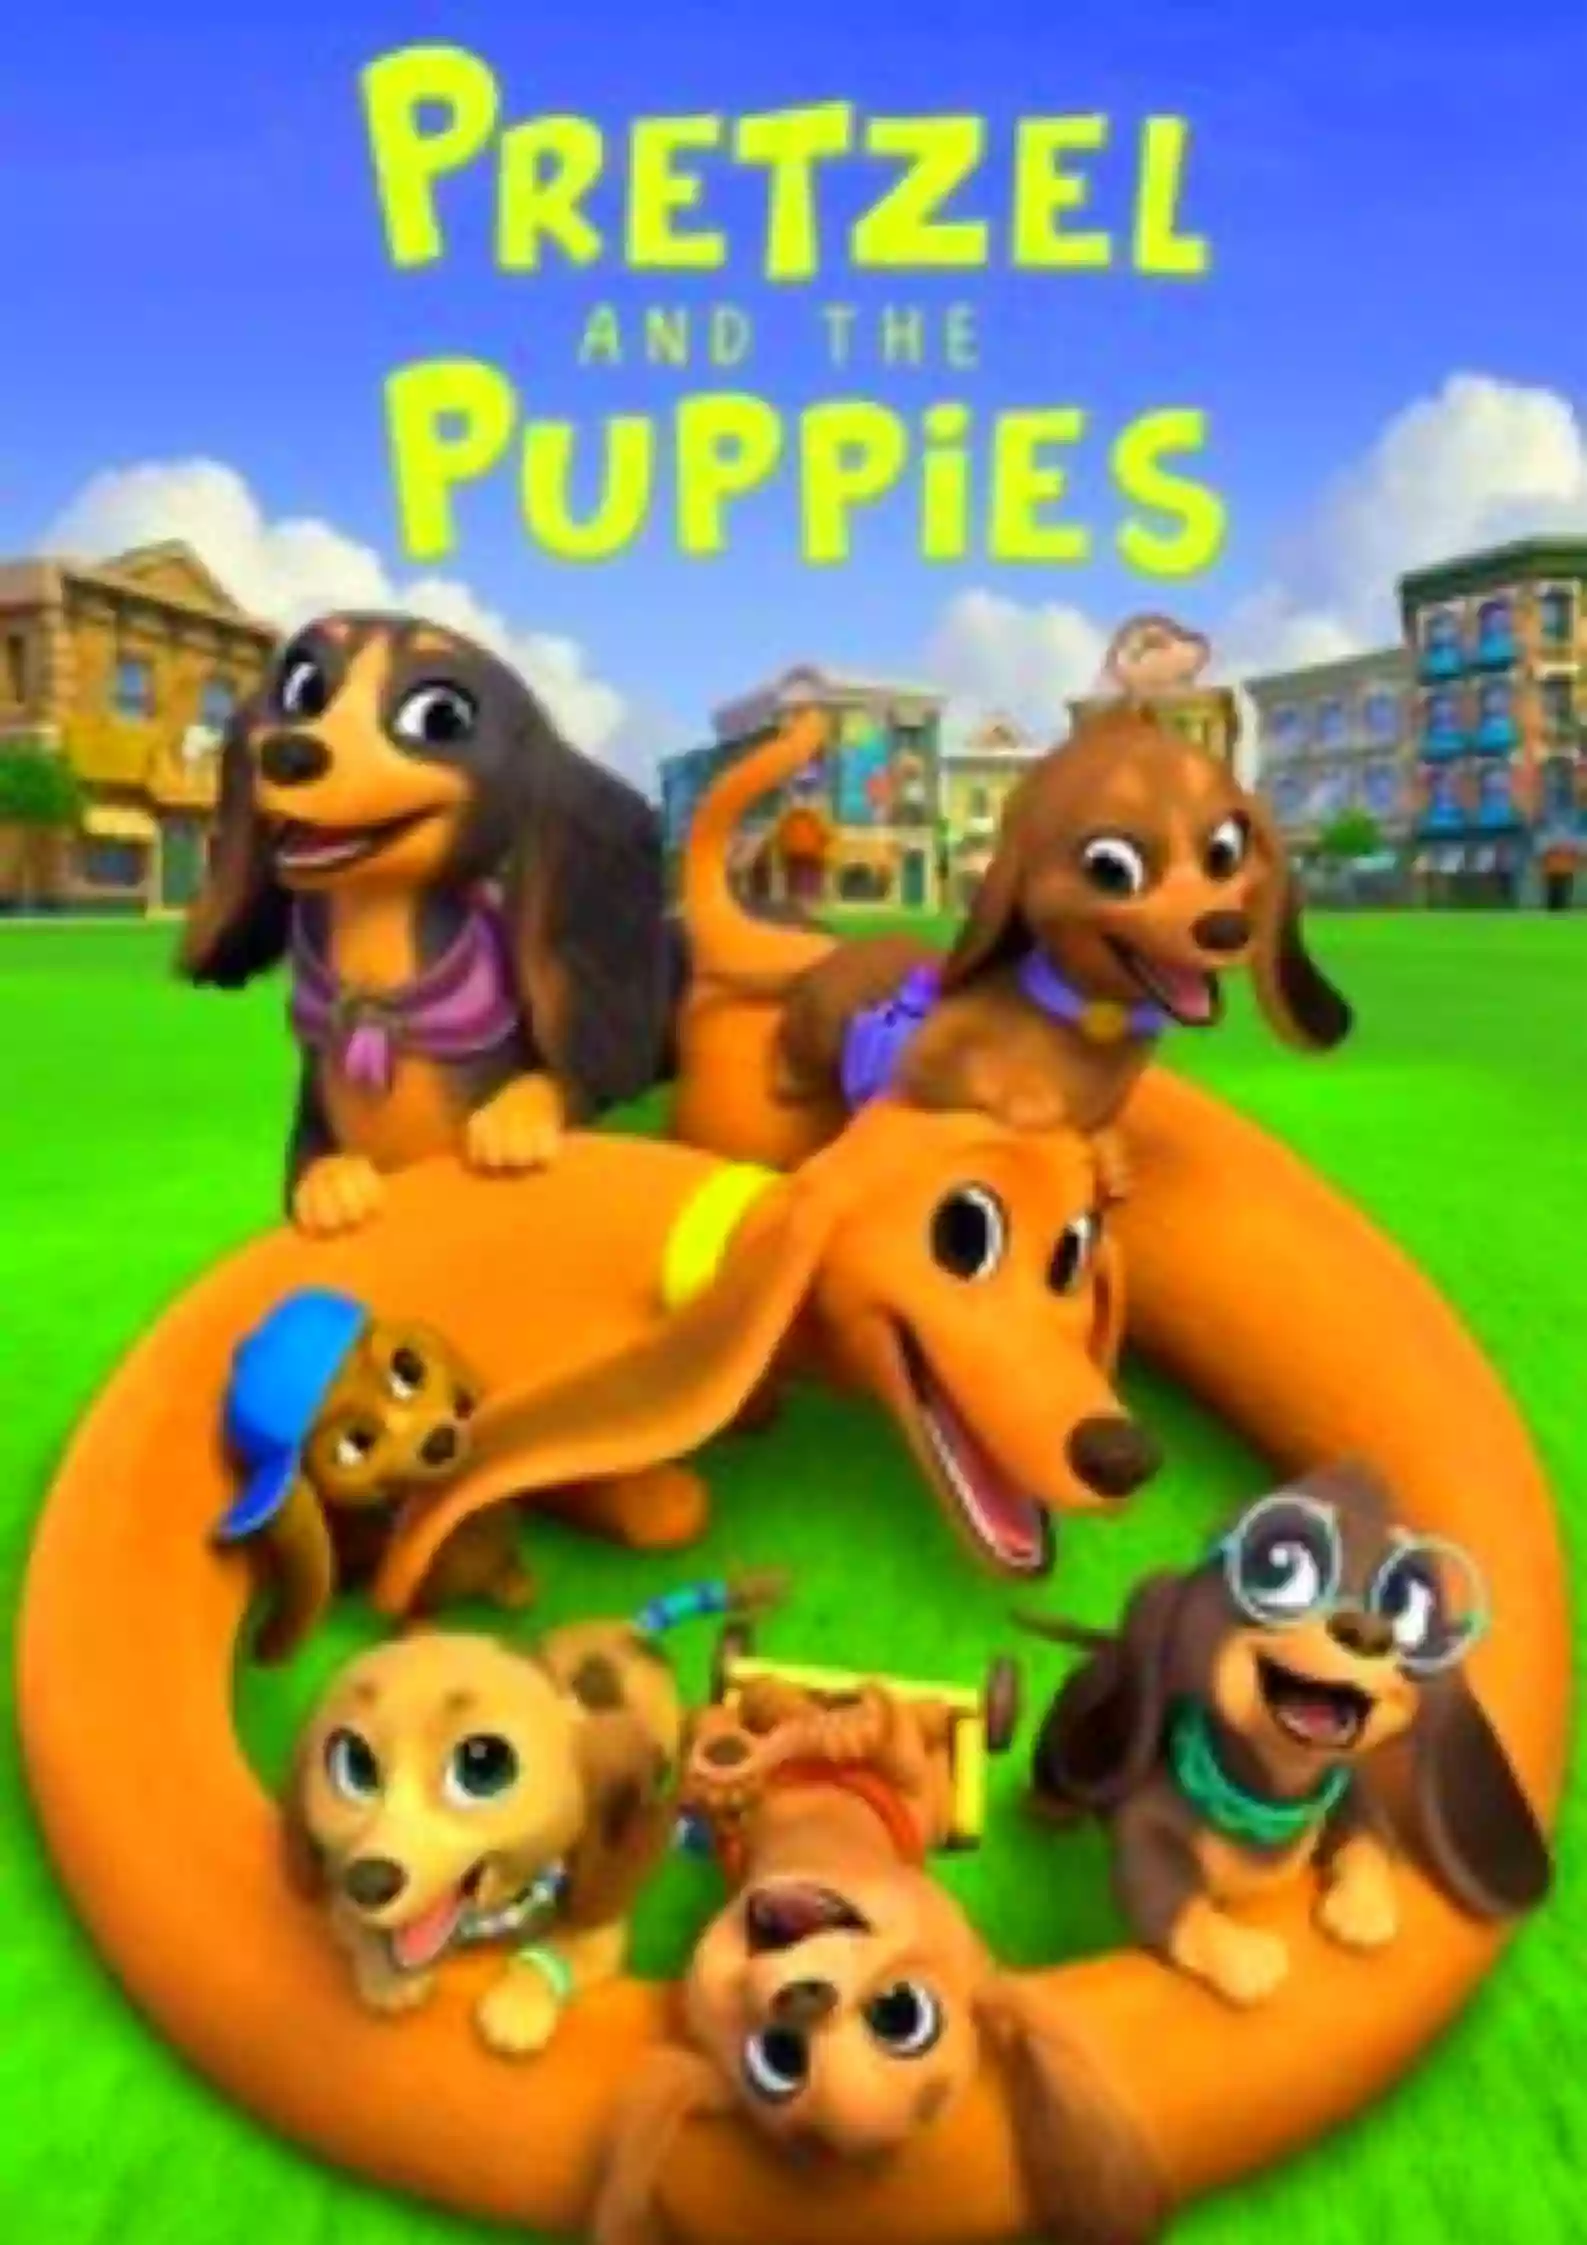 Pretzel and the Puppies Parents guide Age Rating | 2022